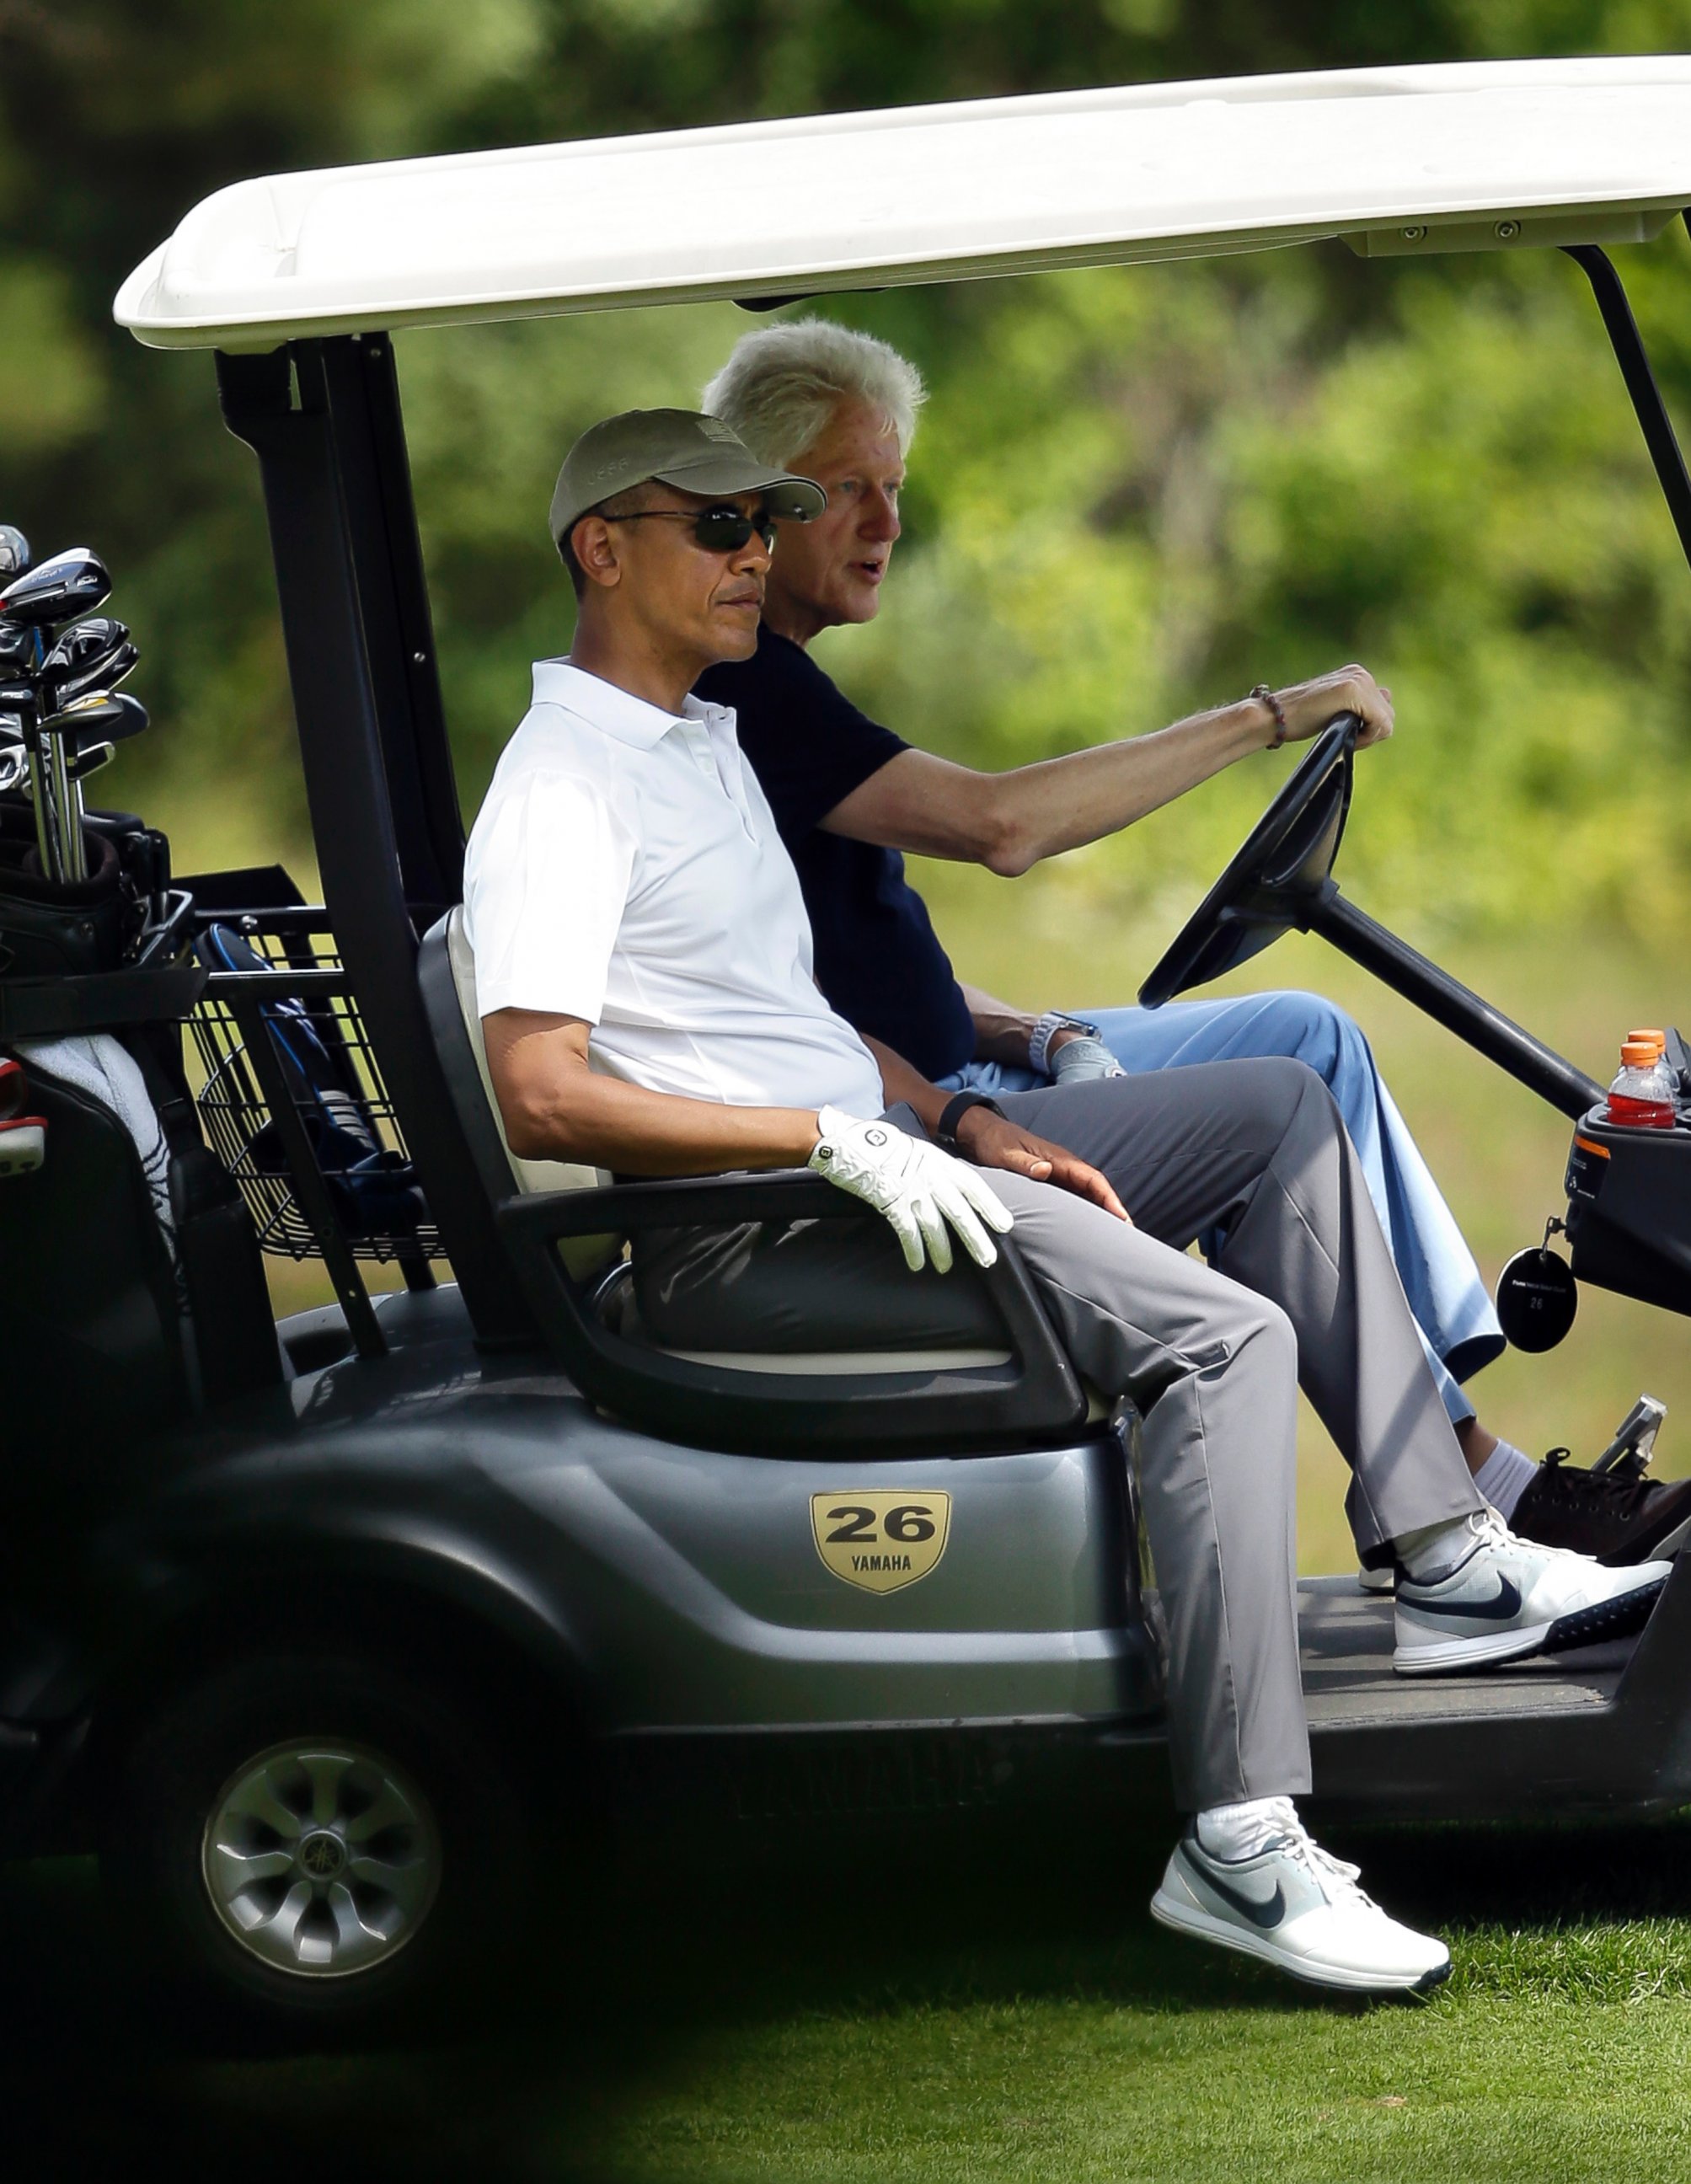 PHOTO: President Barack Obama, front left, and former President Bill Clinton ride in a cart while golfing at Farm Neck Golf Club in Oak Bluffs, Mass. on the island of Martha's Vineyard, Aug. 15, 2015.